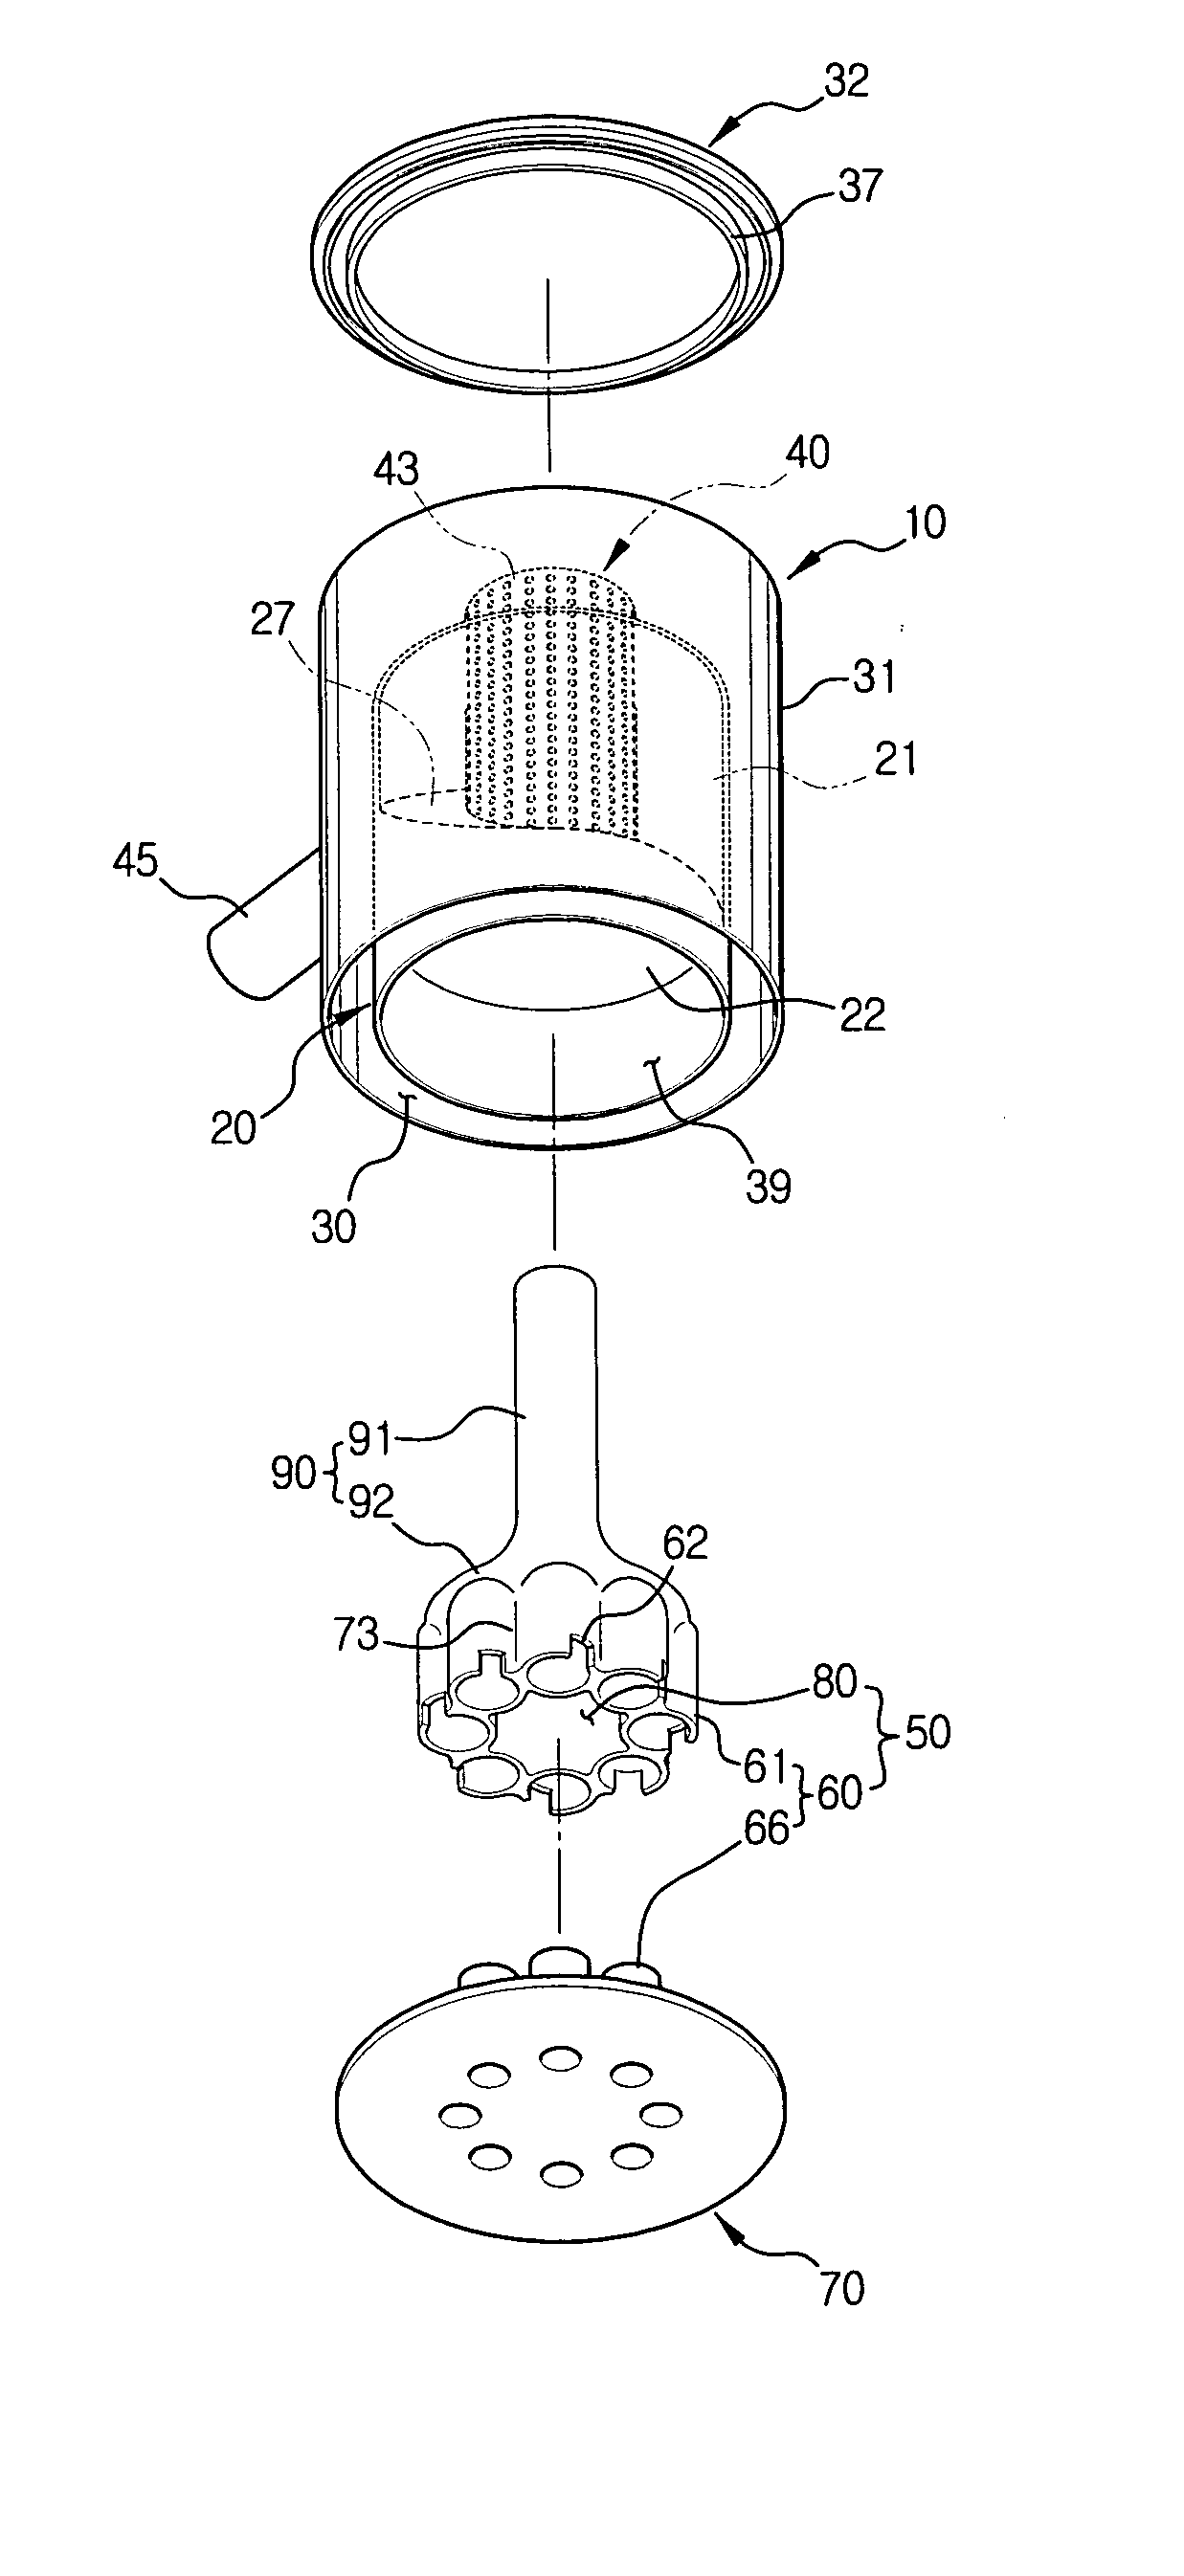 Multi-cyclone dust collector for vacuum cleaner